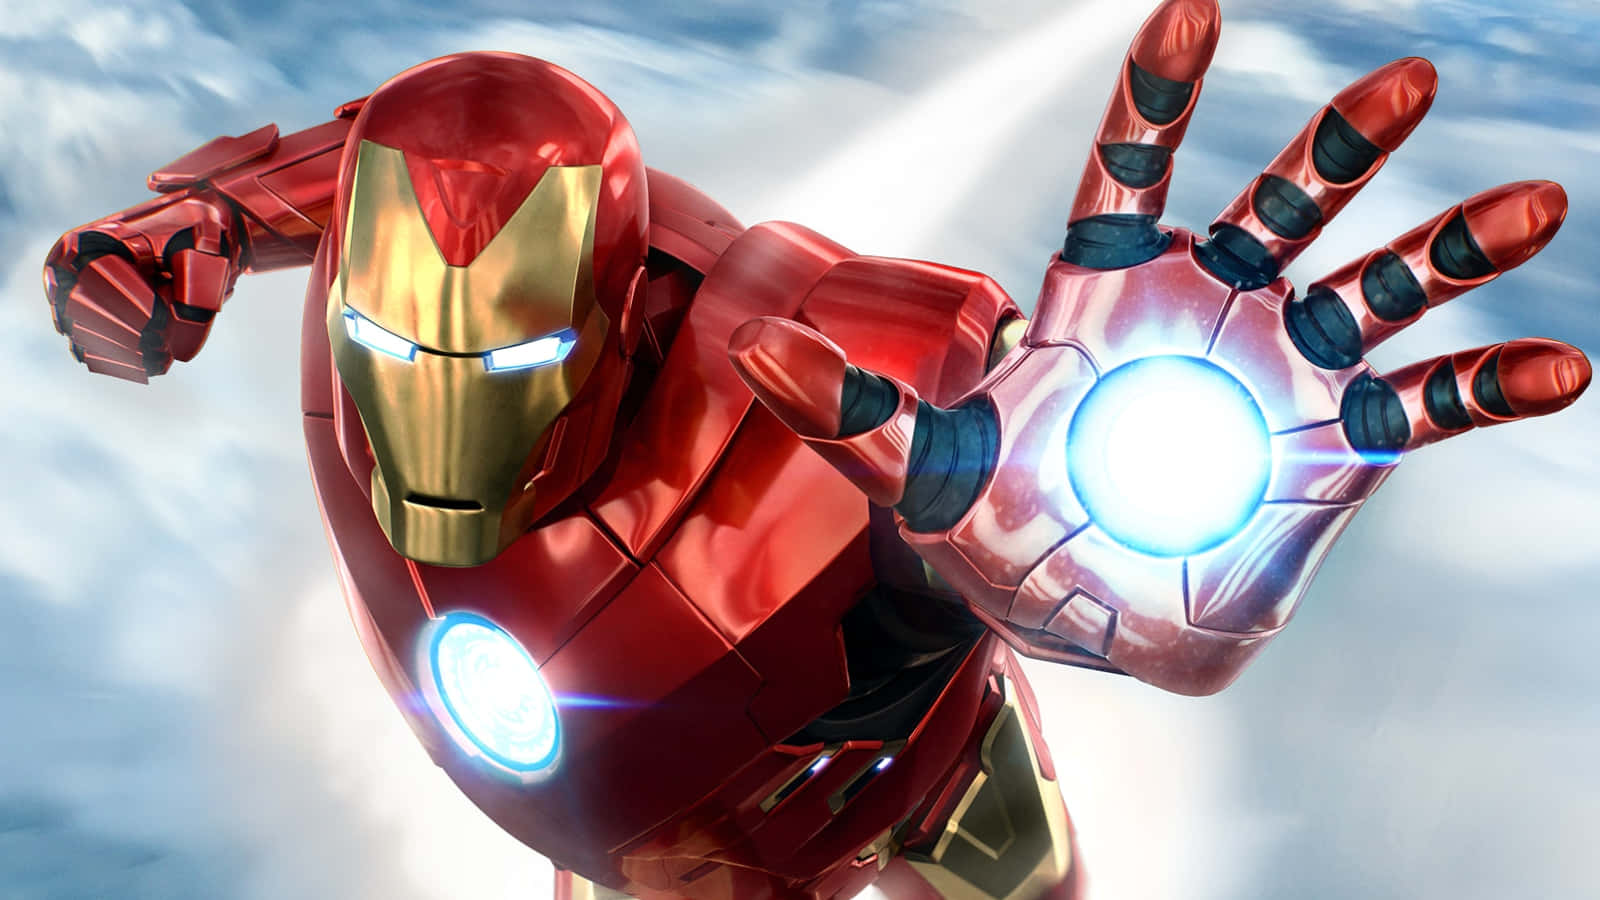 Iron Man Flying In Sky With Glowing Hand Picture